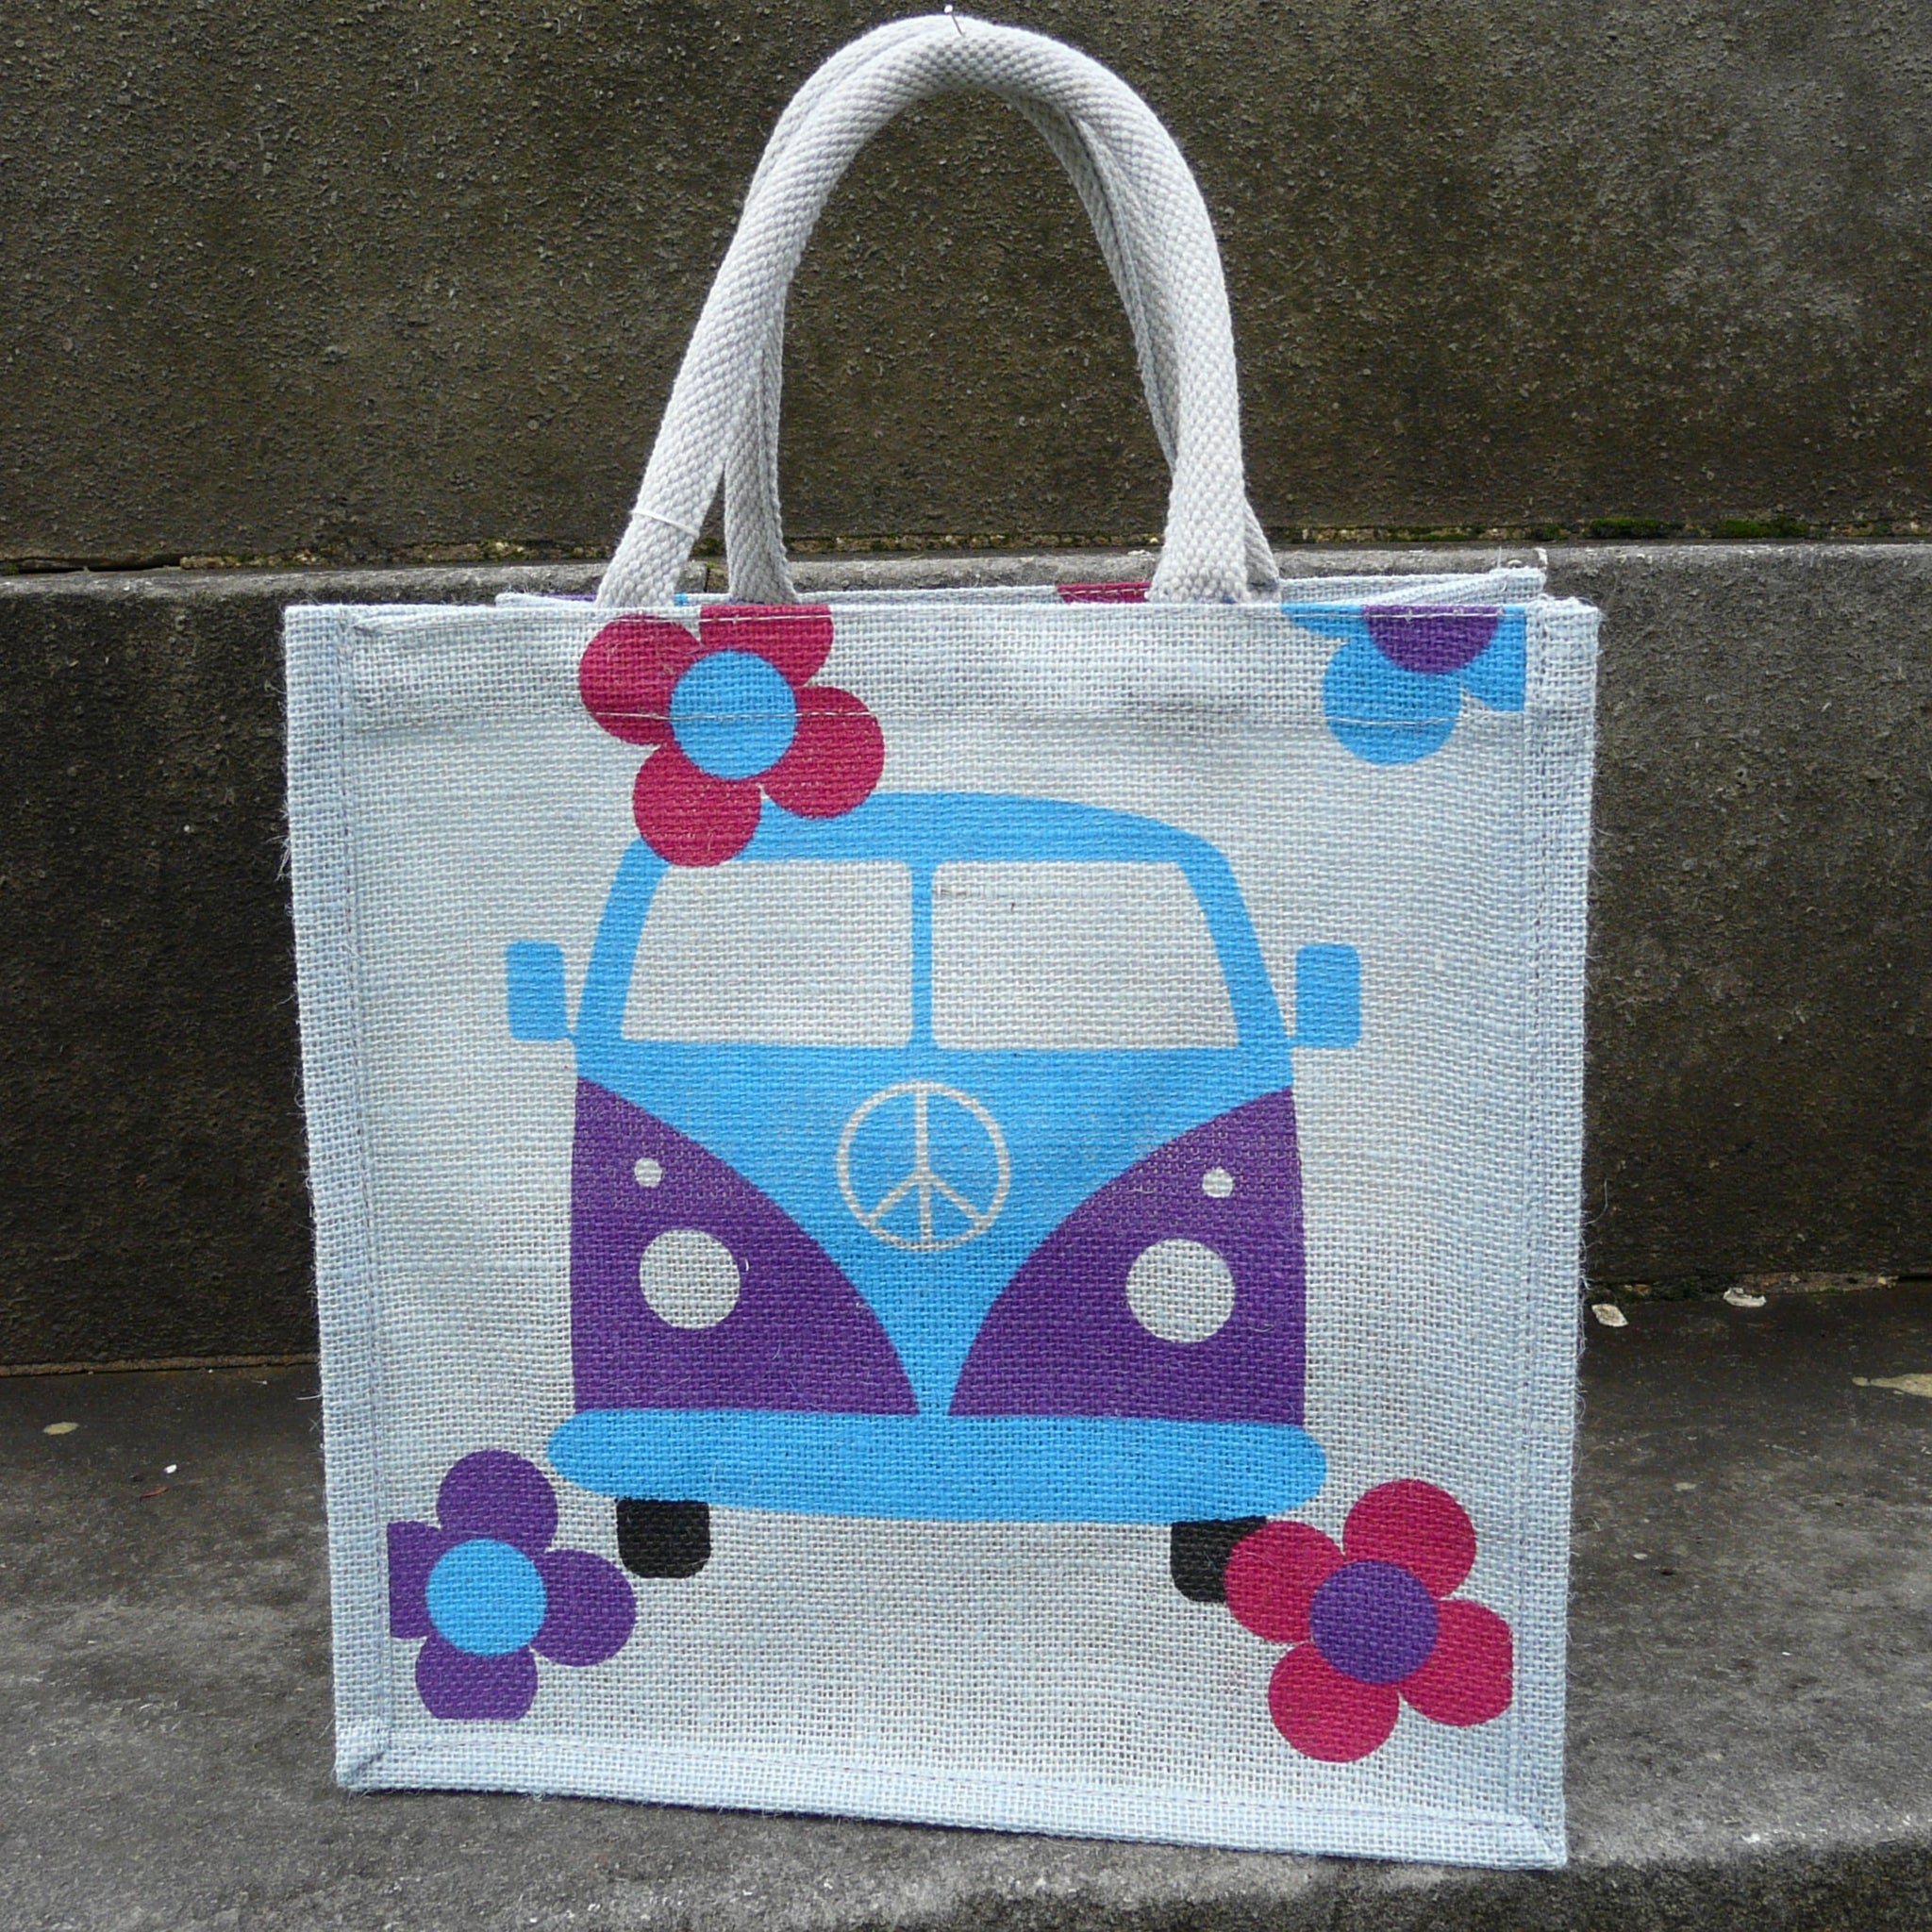 Square Purple Grey Jute Bag with picture of front of blue and purple campervan with 4 flowers